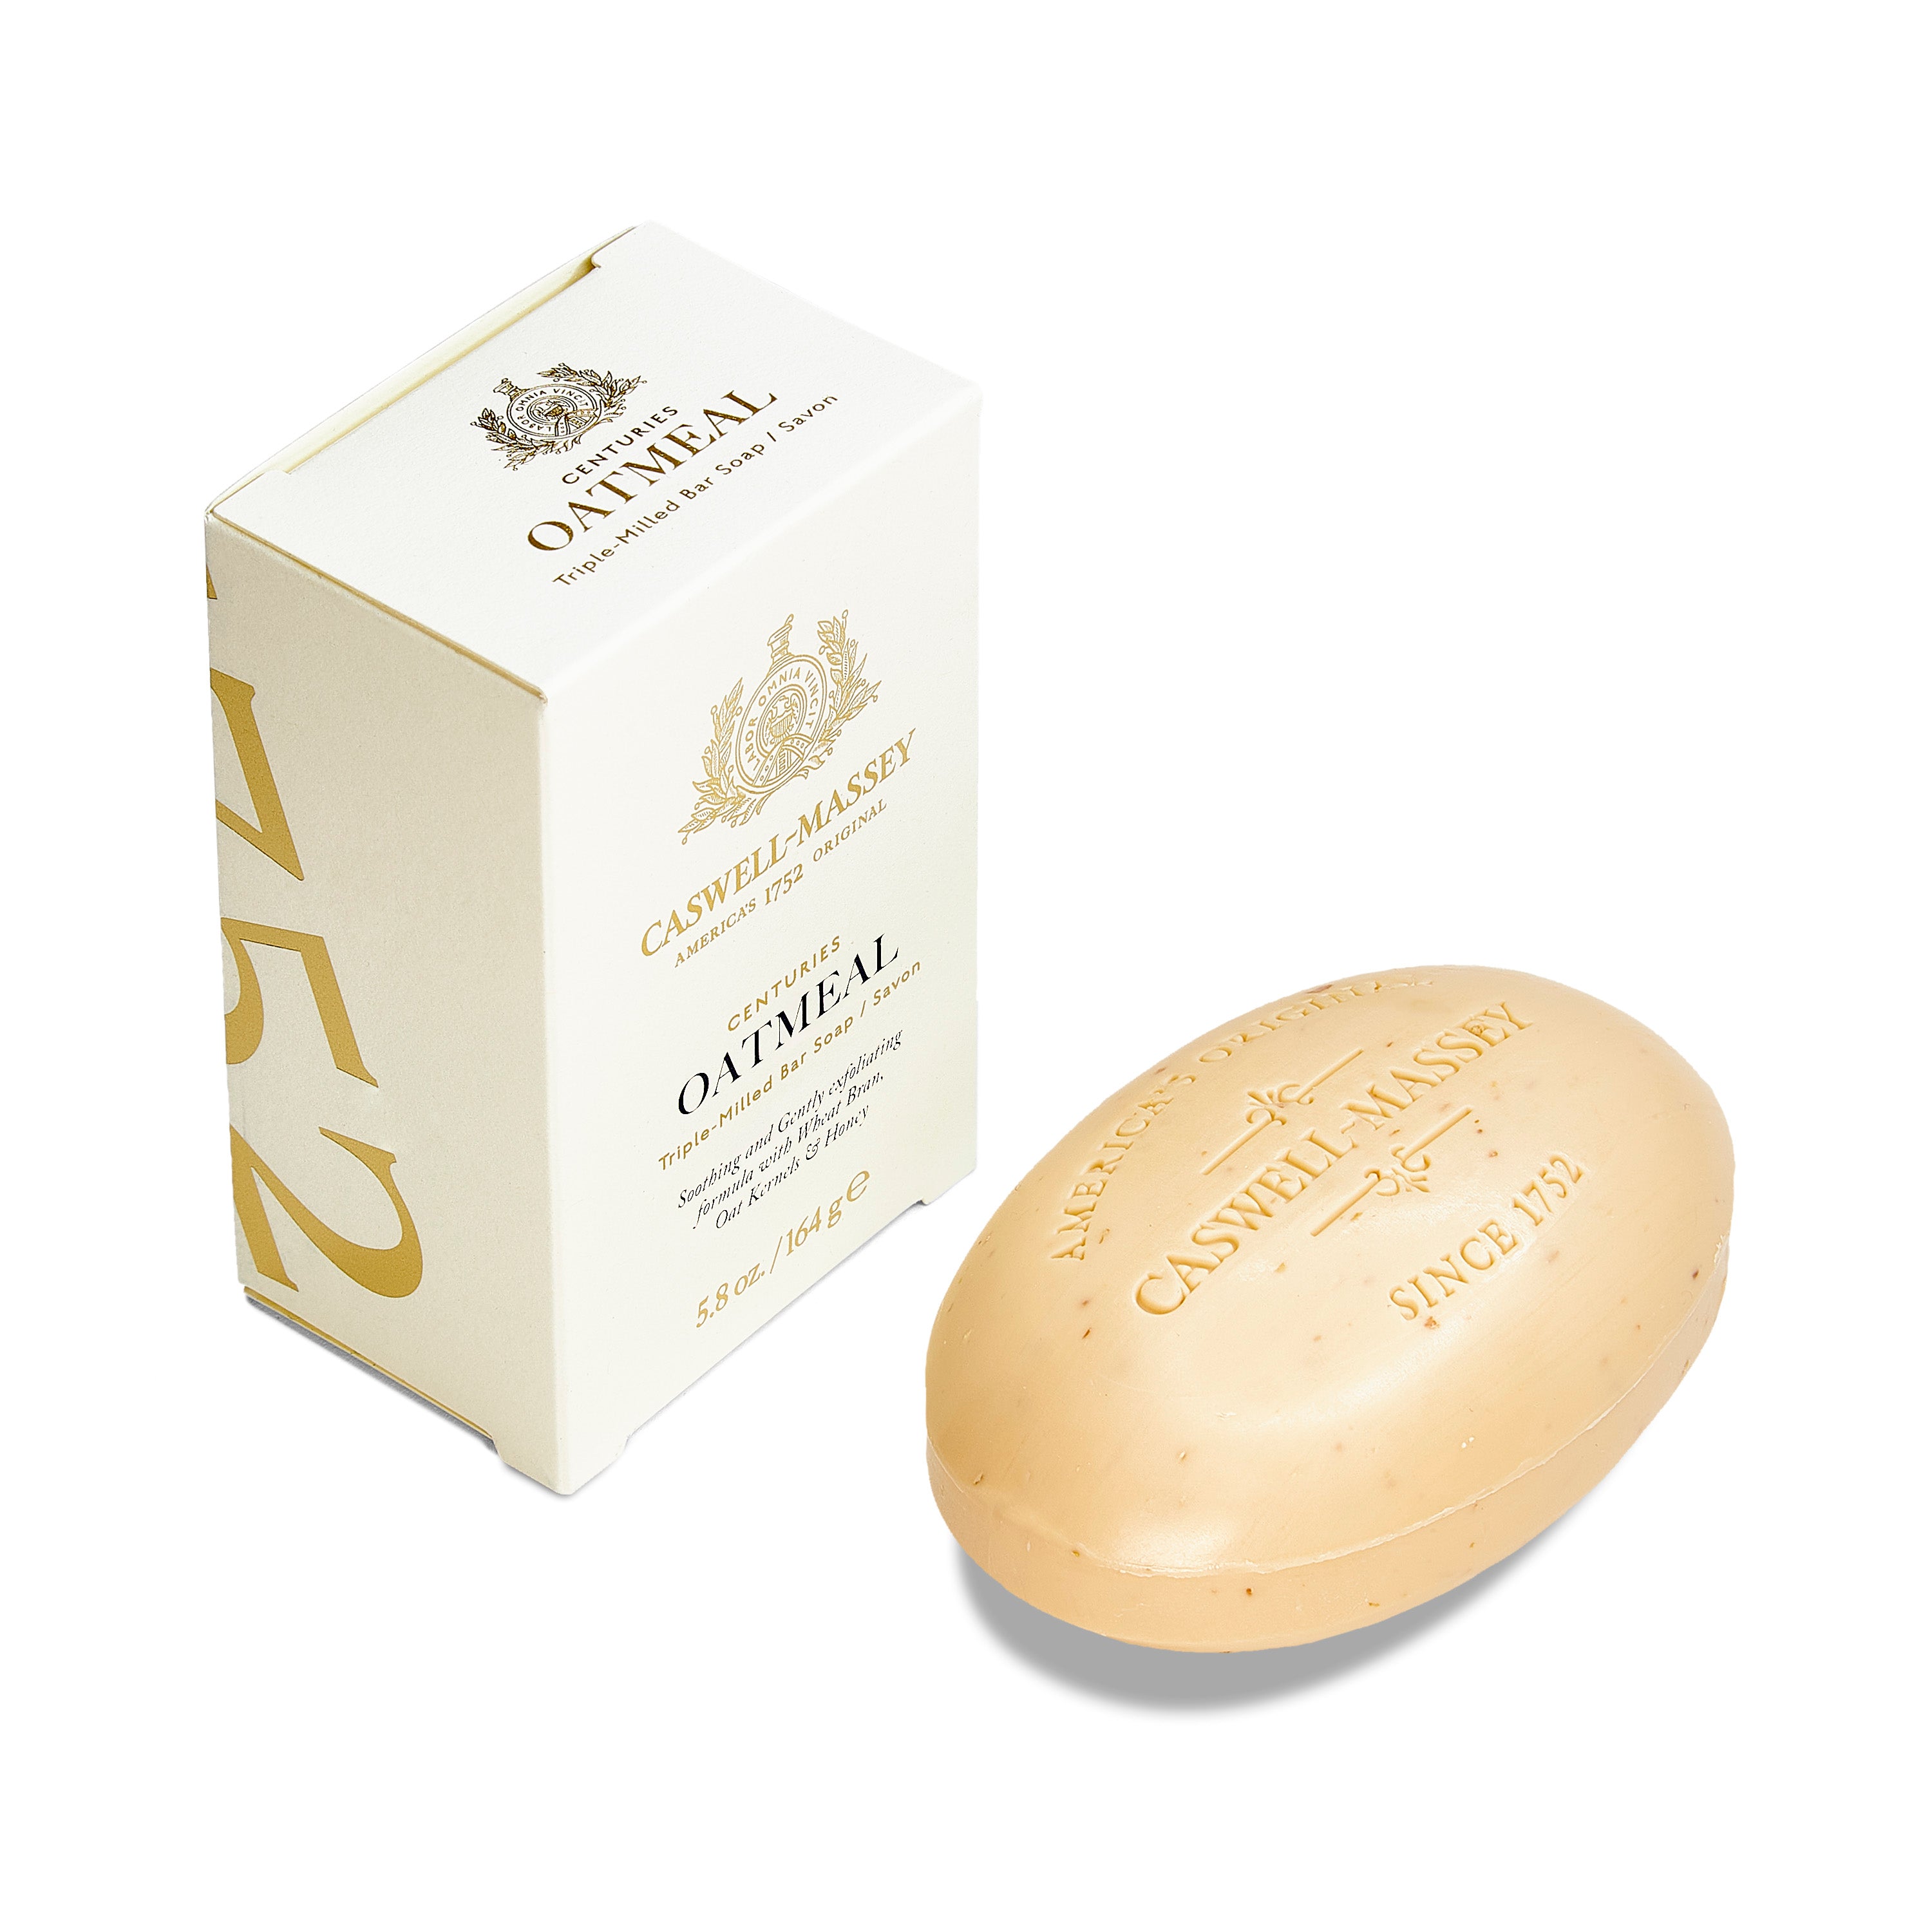 Caswell-Massey® Centuries Oatmeal Soap shown next to cream box